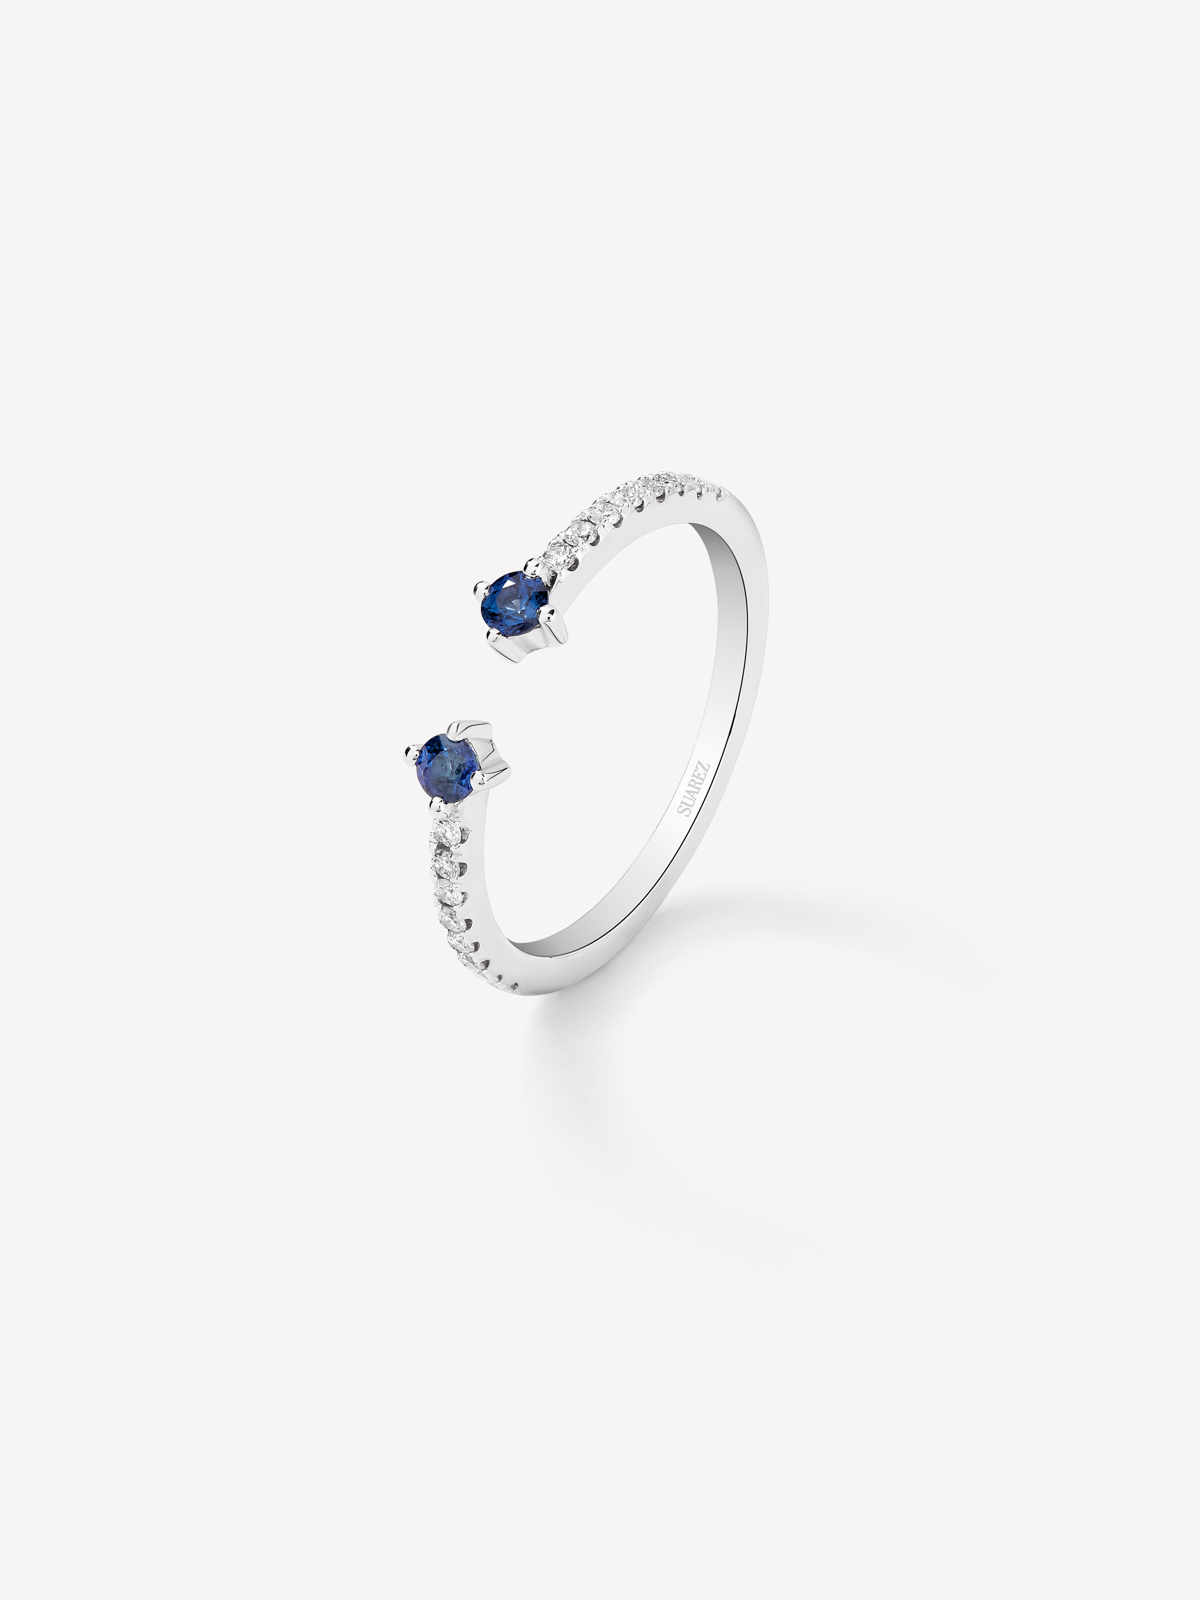 18K white gold open ring with sapphire and diamond